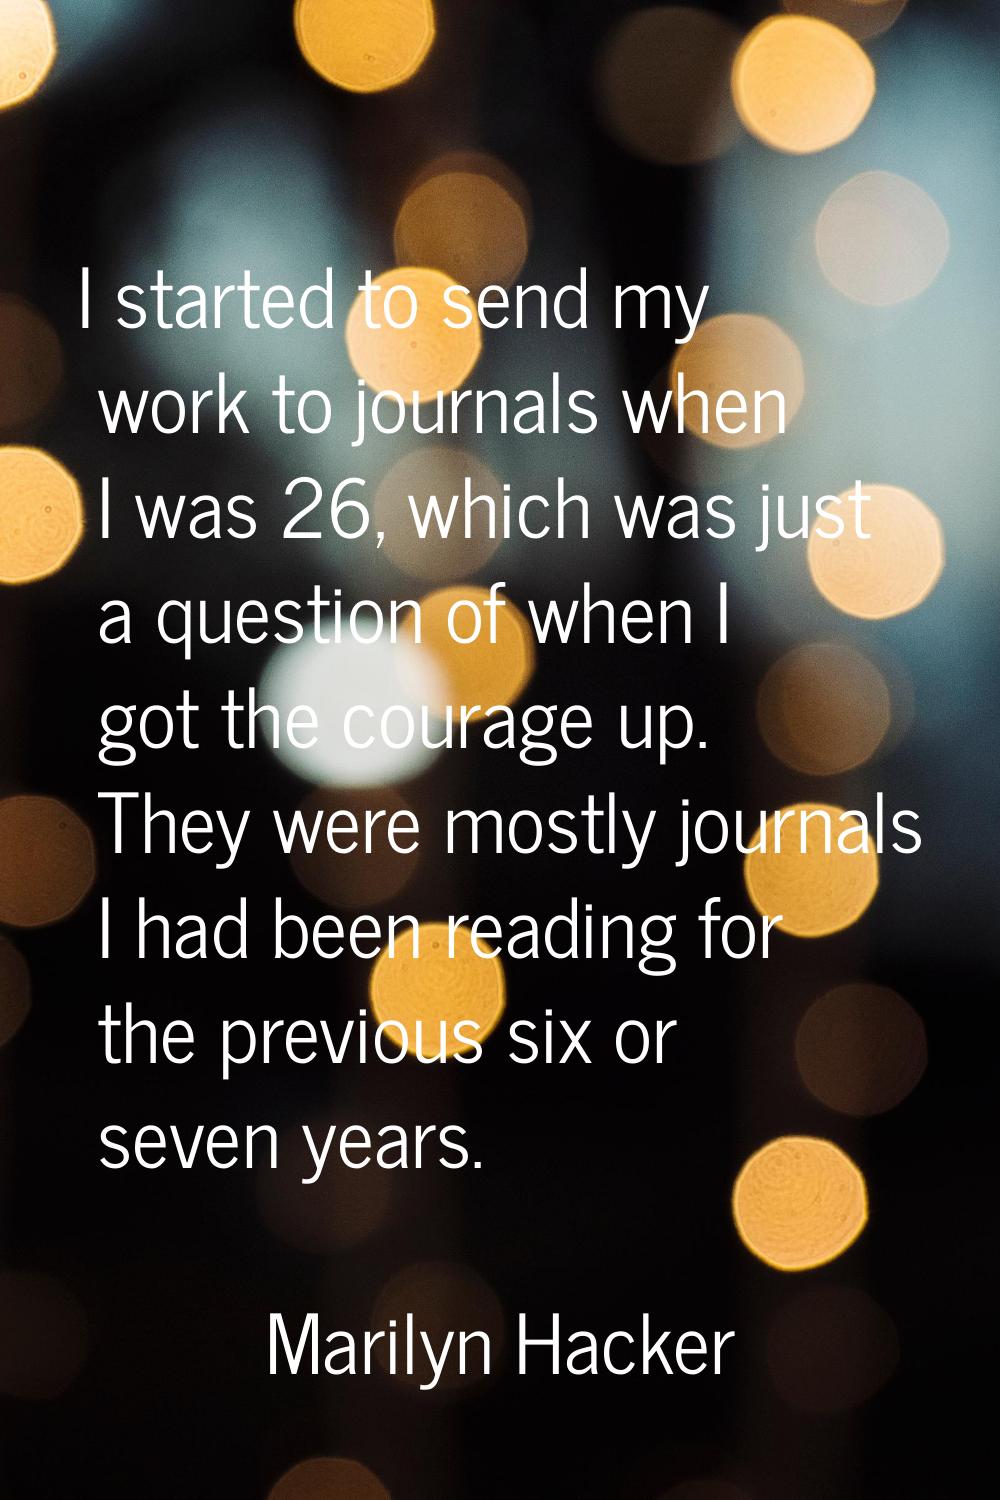 I started to send my work to journals when I was 26, which was just a question of when I got the co